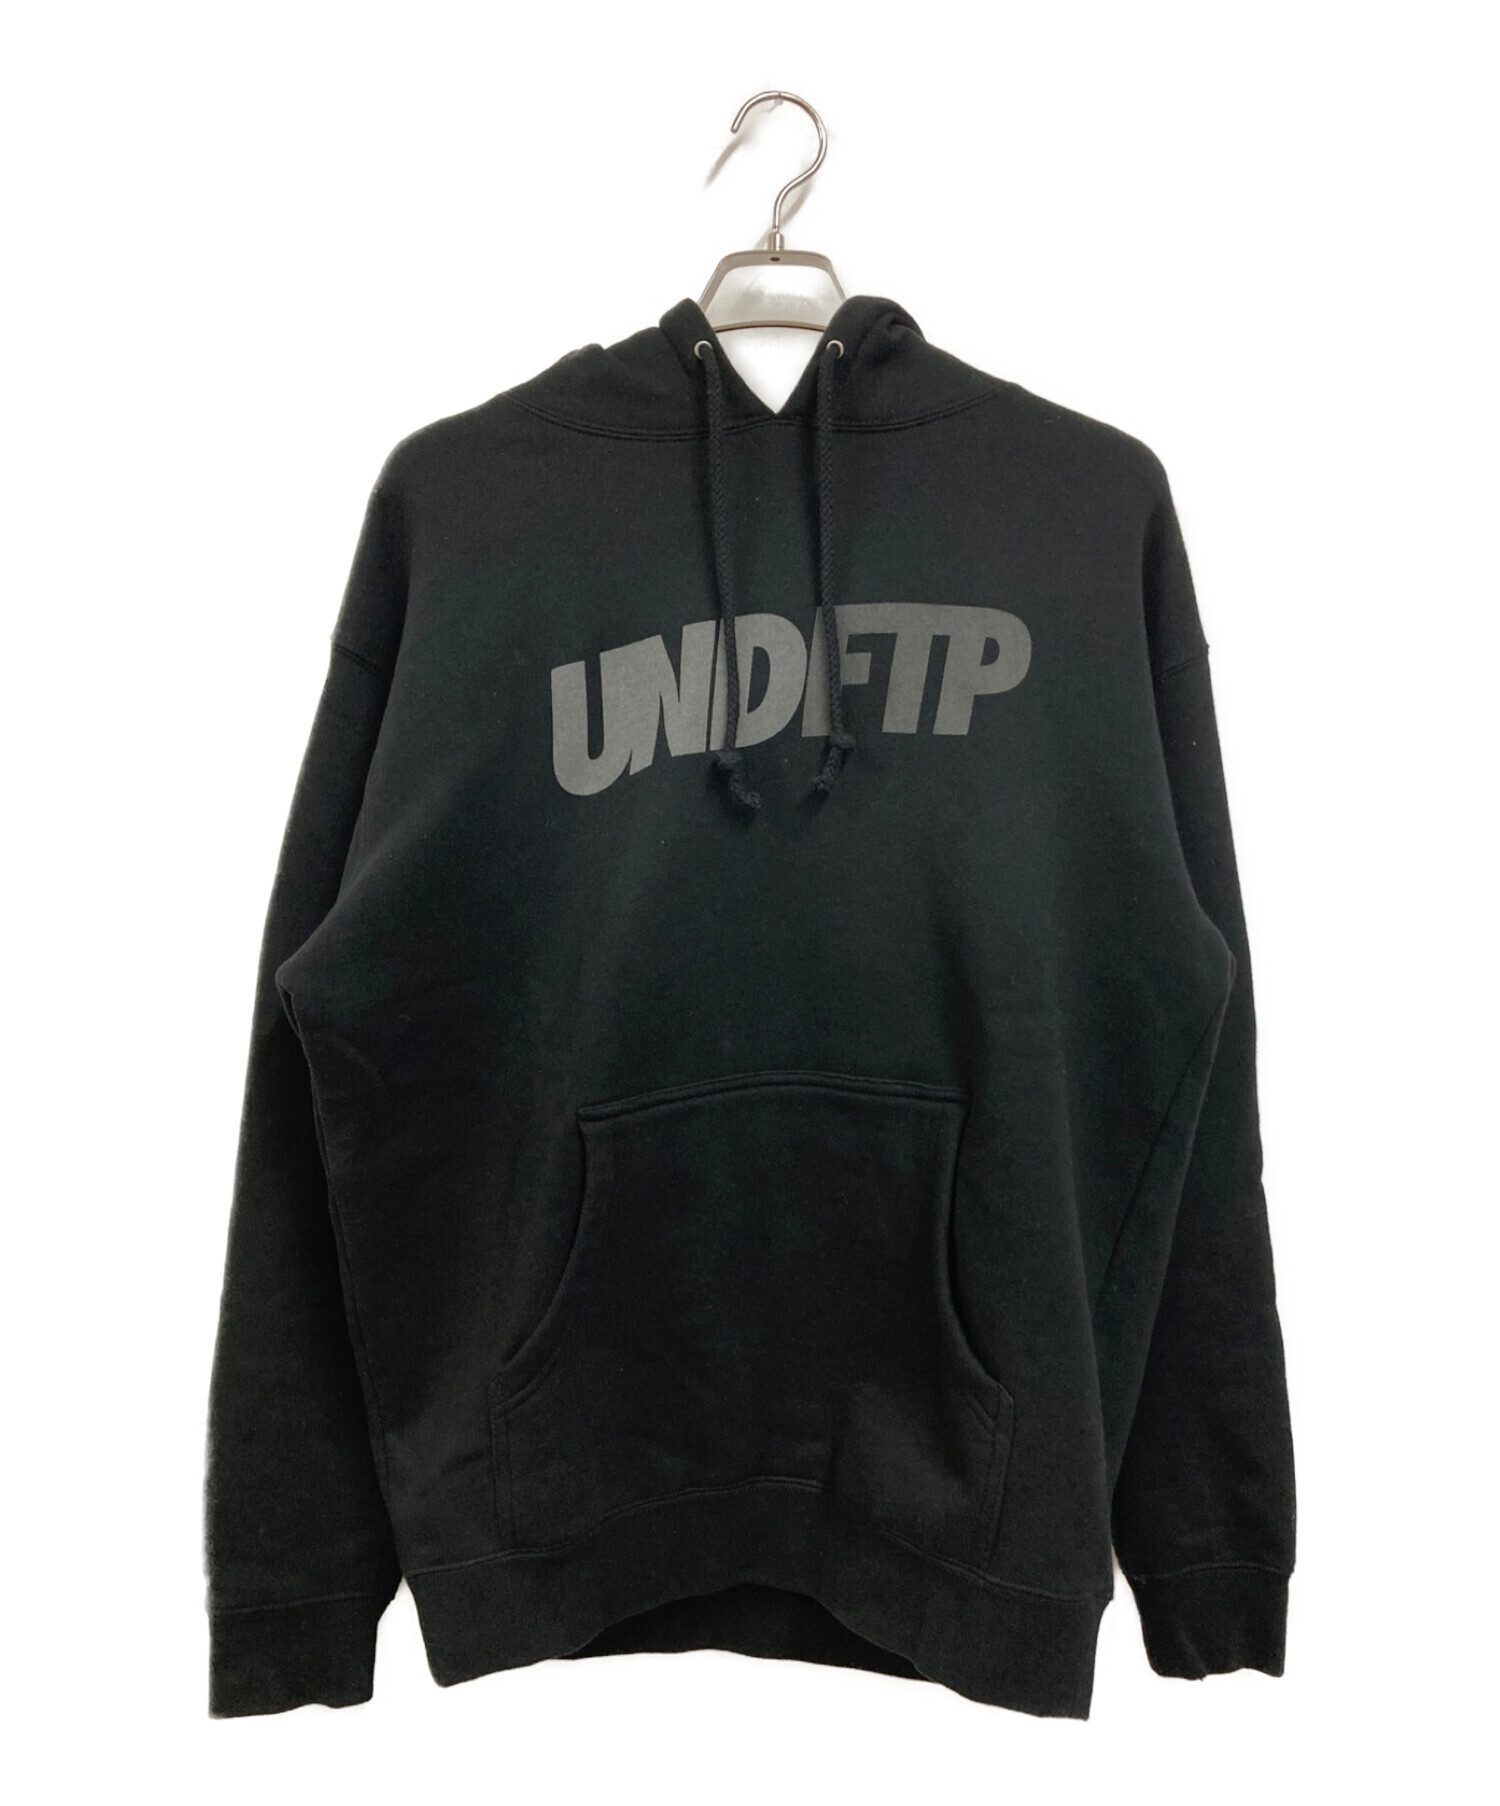 undefeated × FTP